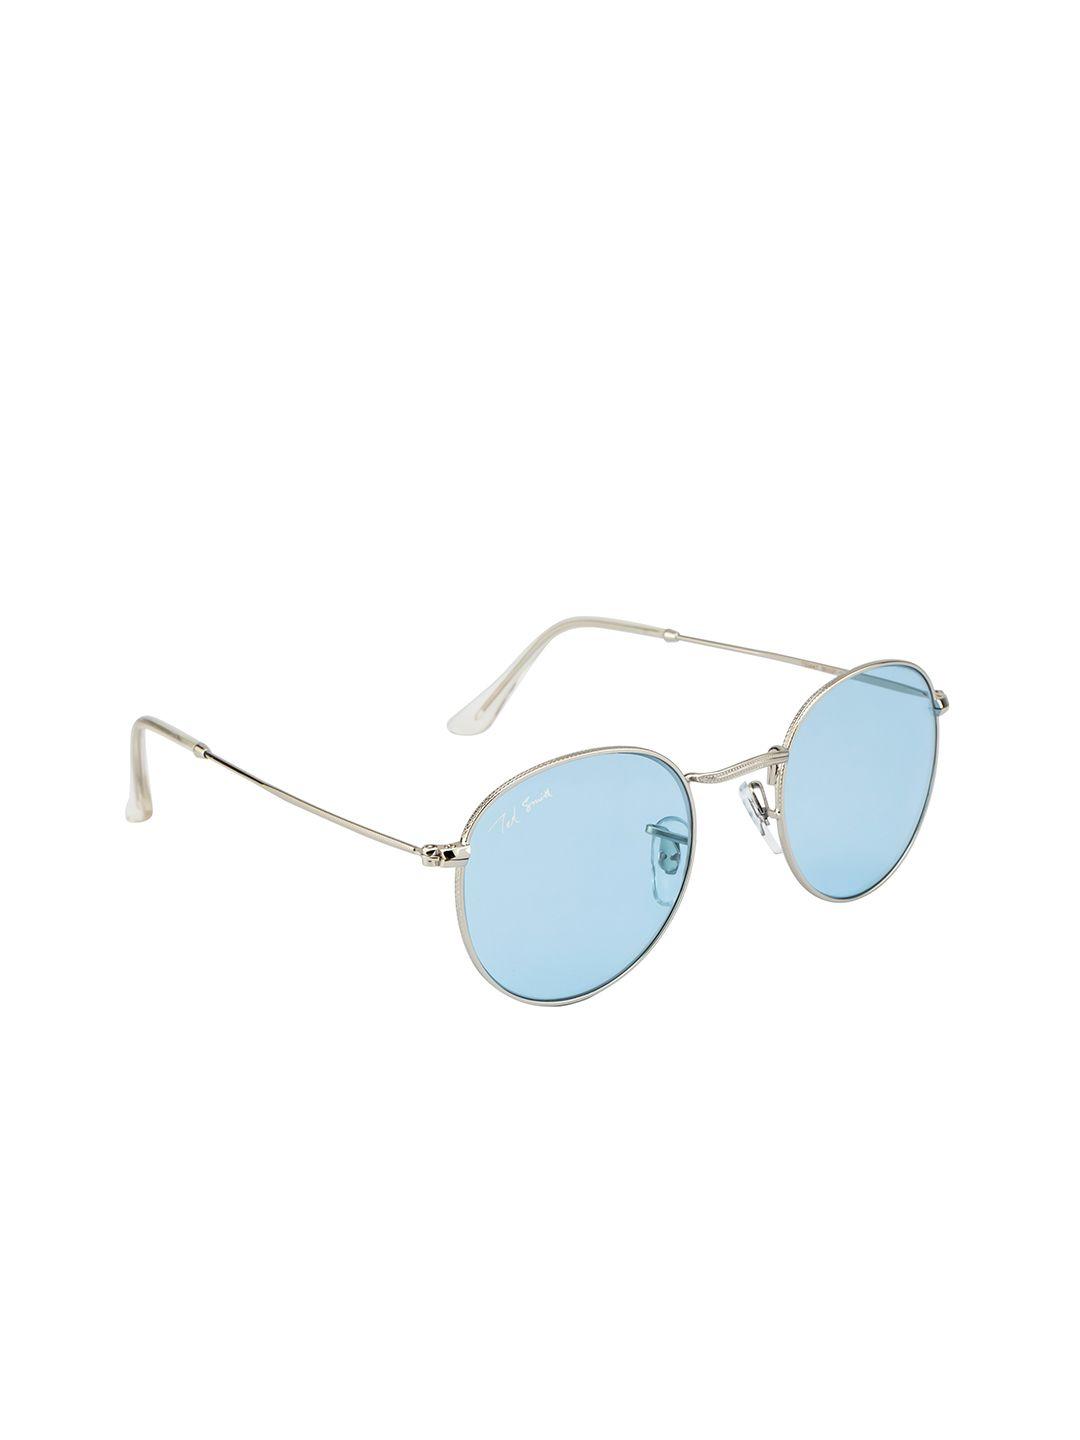 ted smith unisex blue lens & silver-toned round sunglass with uv protected lens - moon_c14